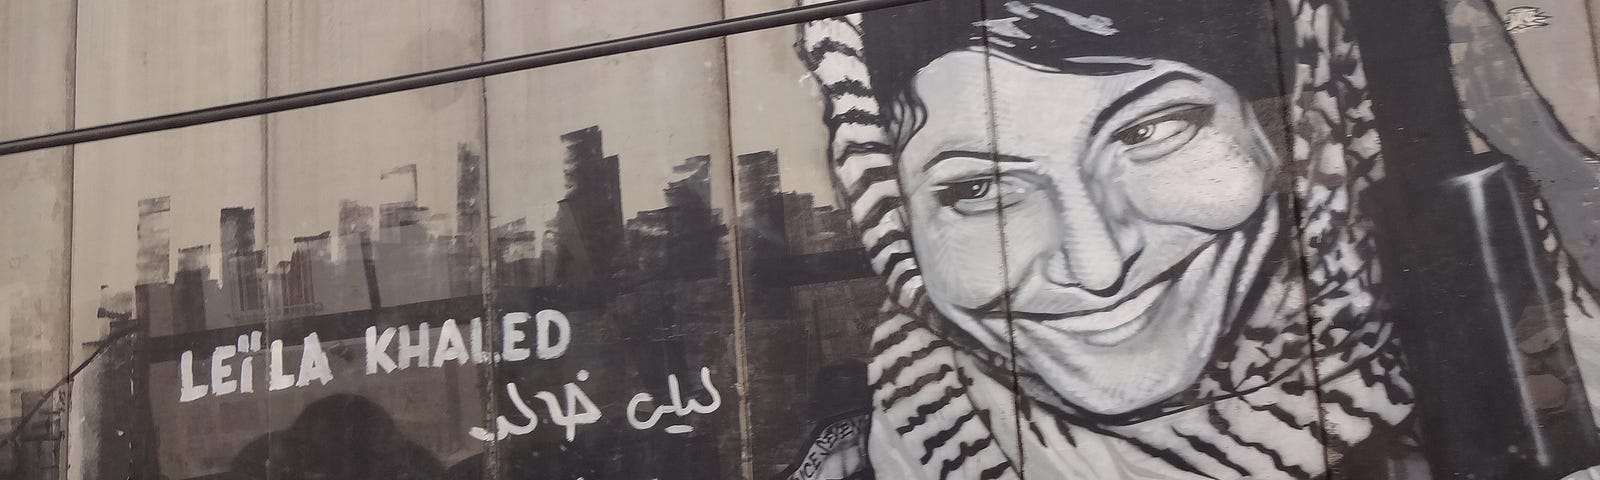 Palestinian freedom fighter Leila Khaled, artwork on the Israeli Apartheid Wall in Bethlehem, Palestine (Photo by Bluewind, Licensed under Creative Commons 3.0).